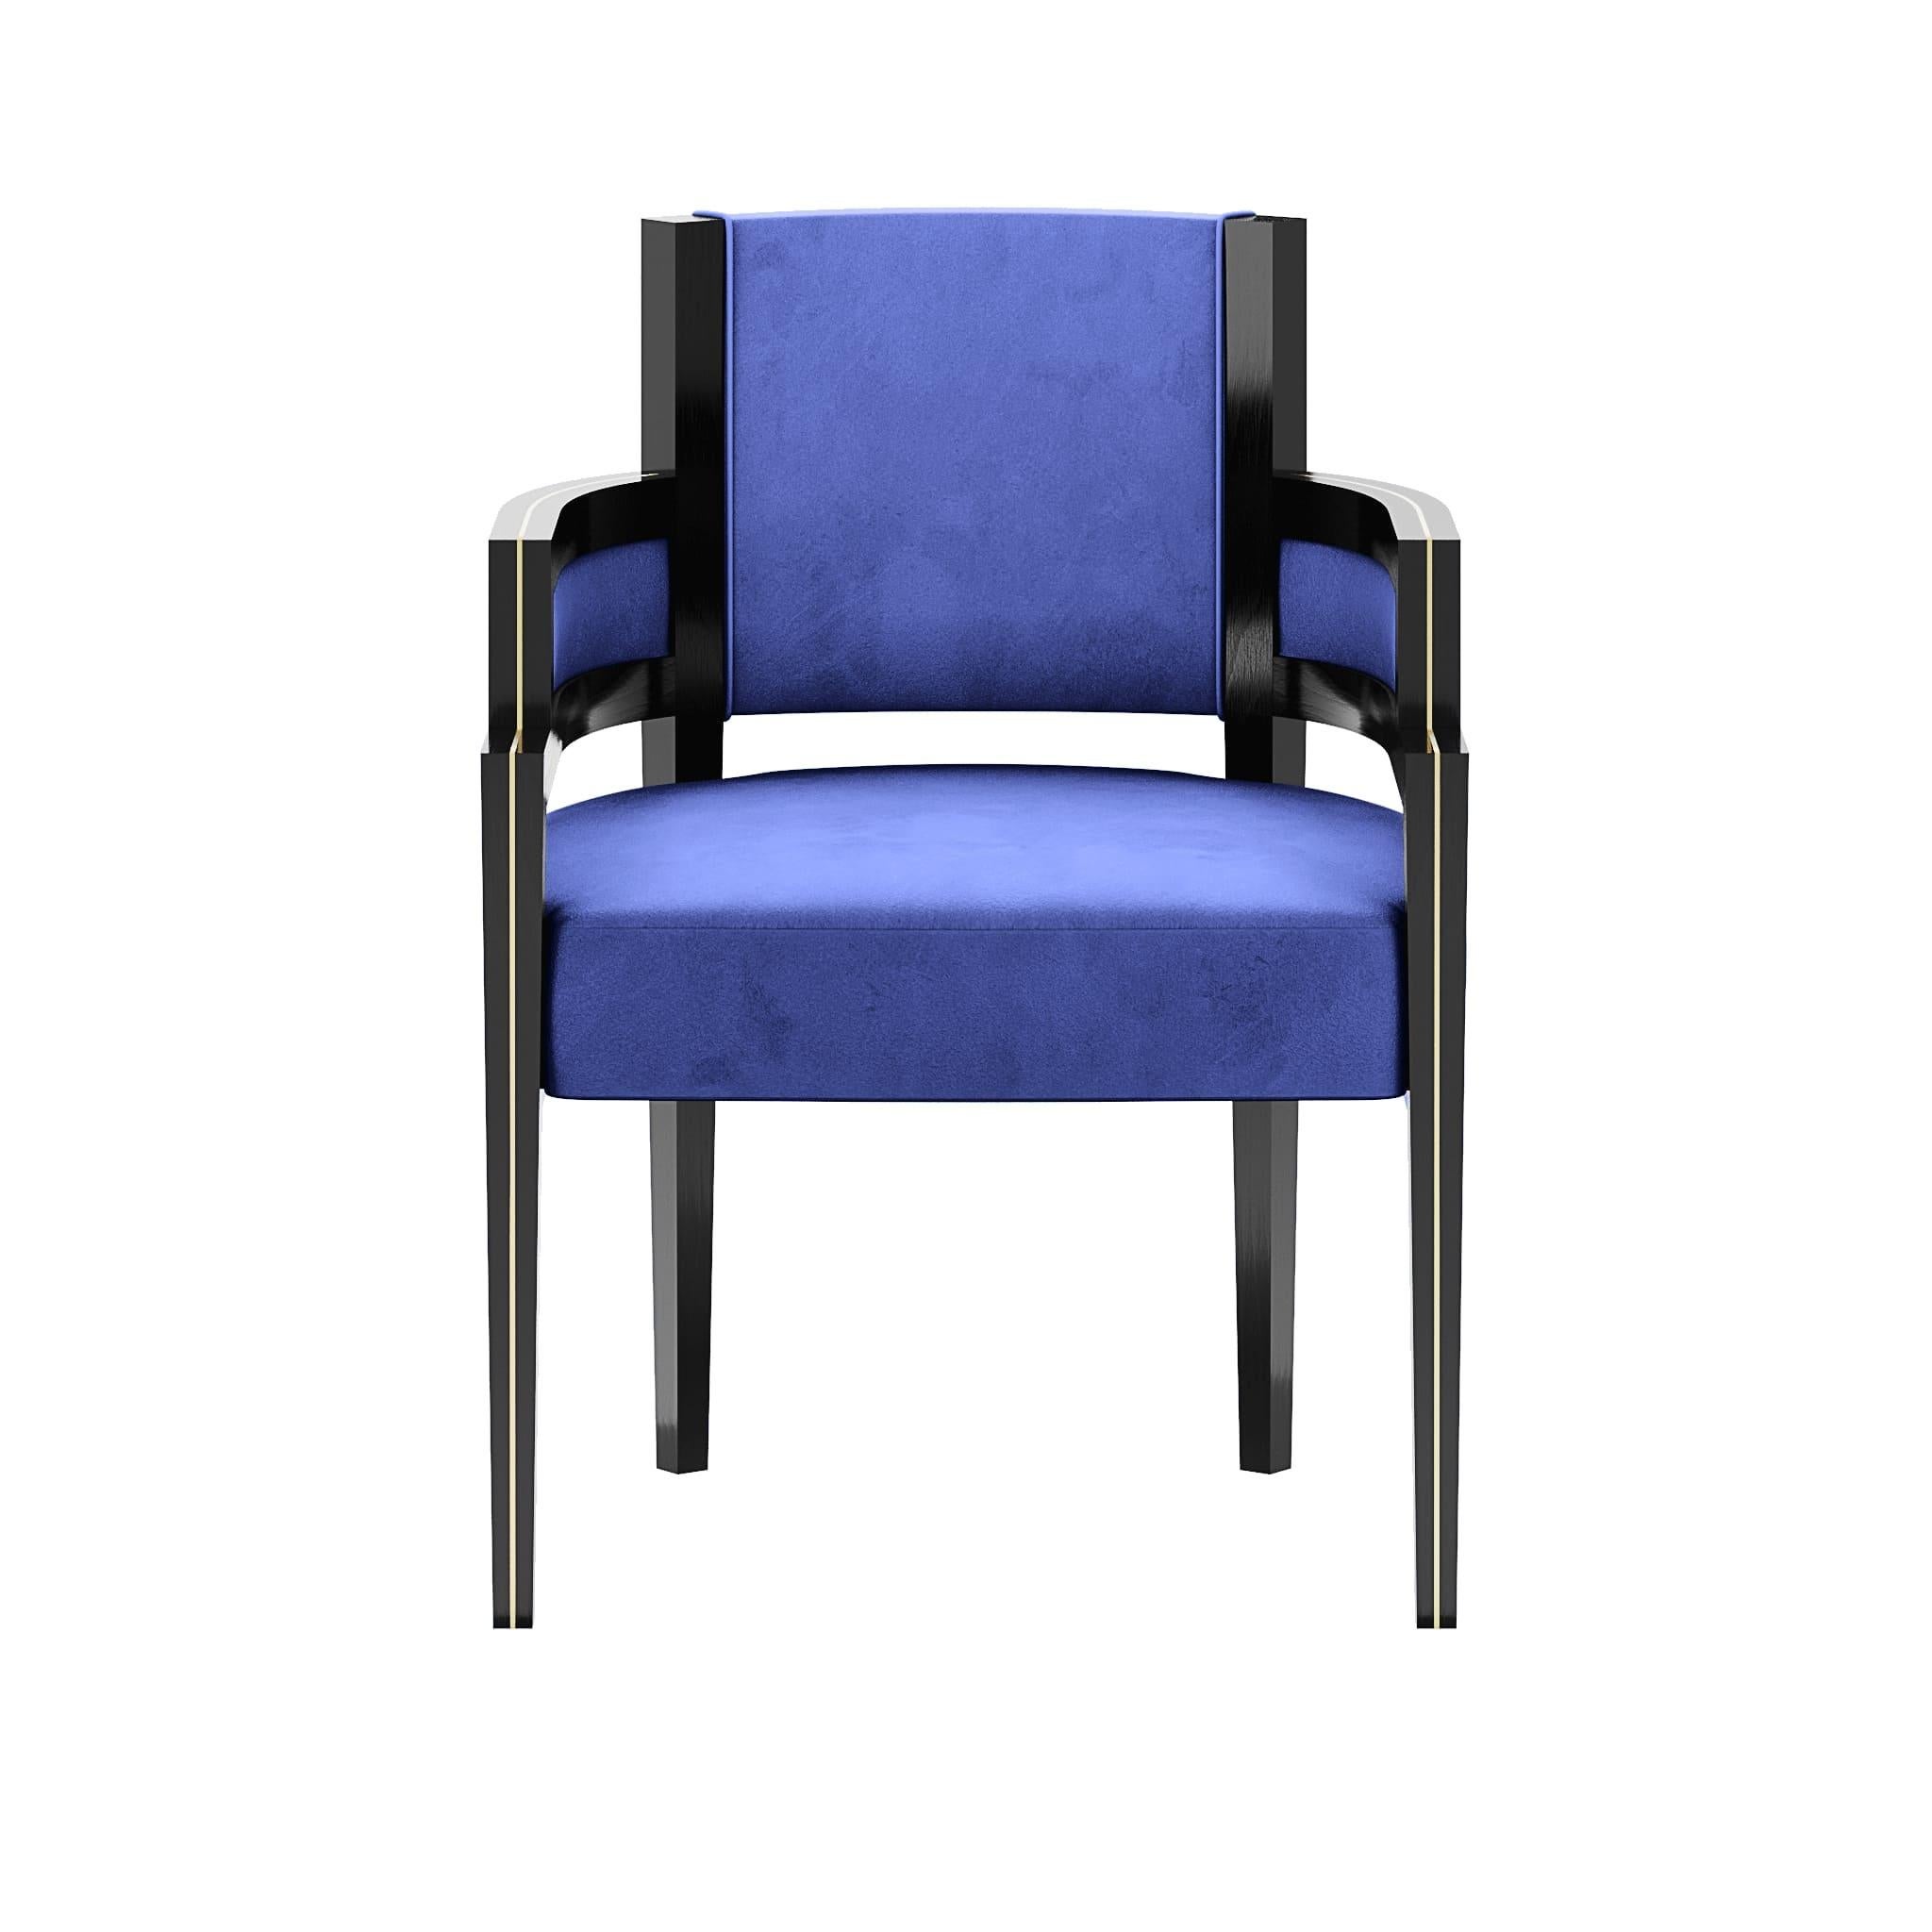 Pina Chair is an art deco-style dining chair whose shape provides the best comfort for guests—upholstered in velvet with a modern wood structure. Perfect for modern dining room projects that aim for a classic-chic vibe.

Materials: Upholstered in